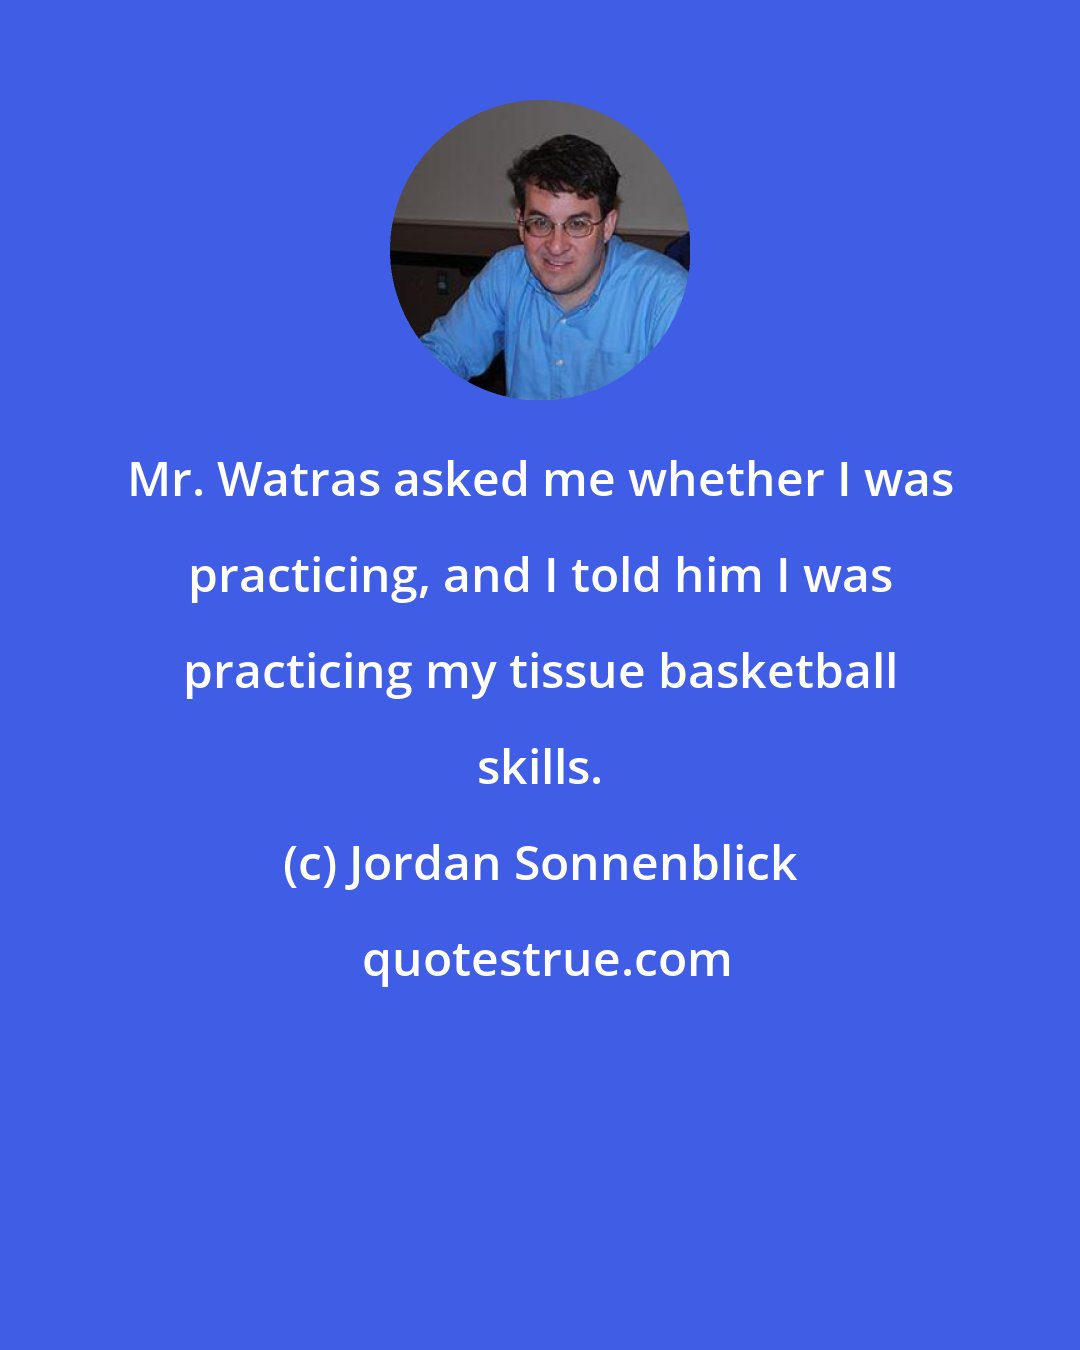 Jordan Sonnenblick: Mr. Watras asked me whether I was practicing, and I told him I was practicing my tissue basketball skills.